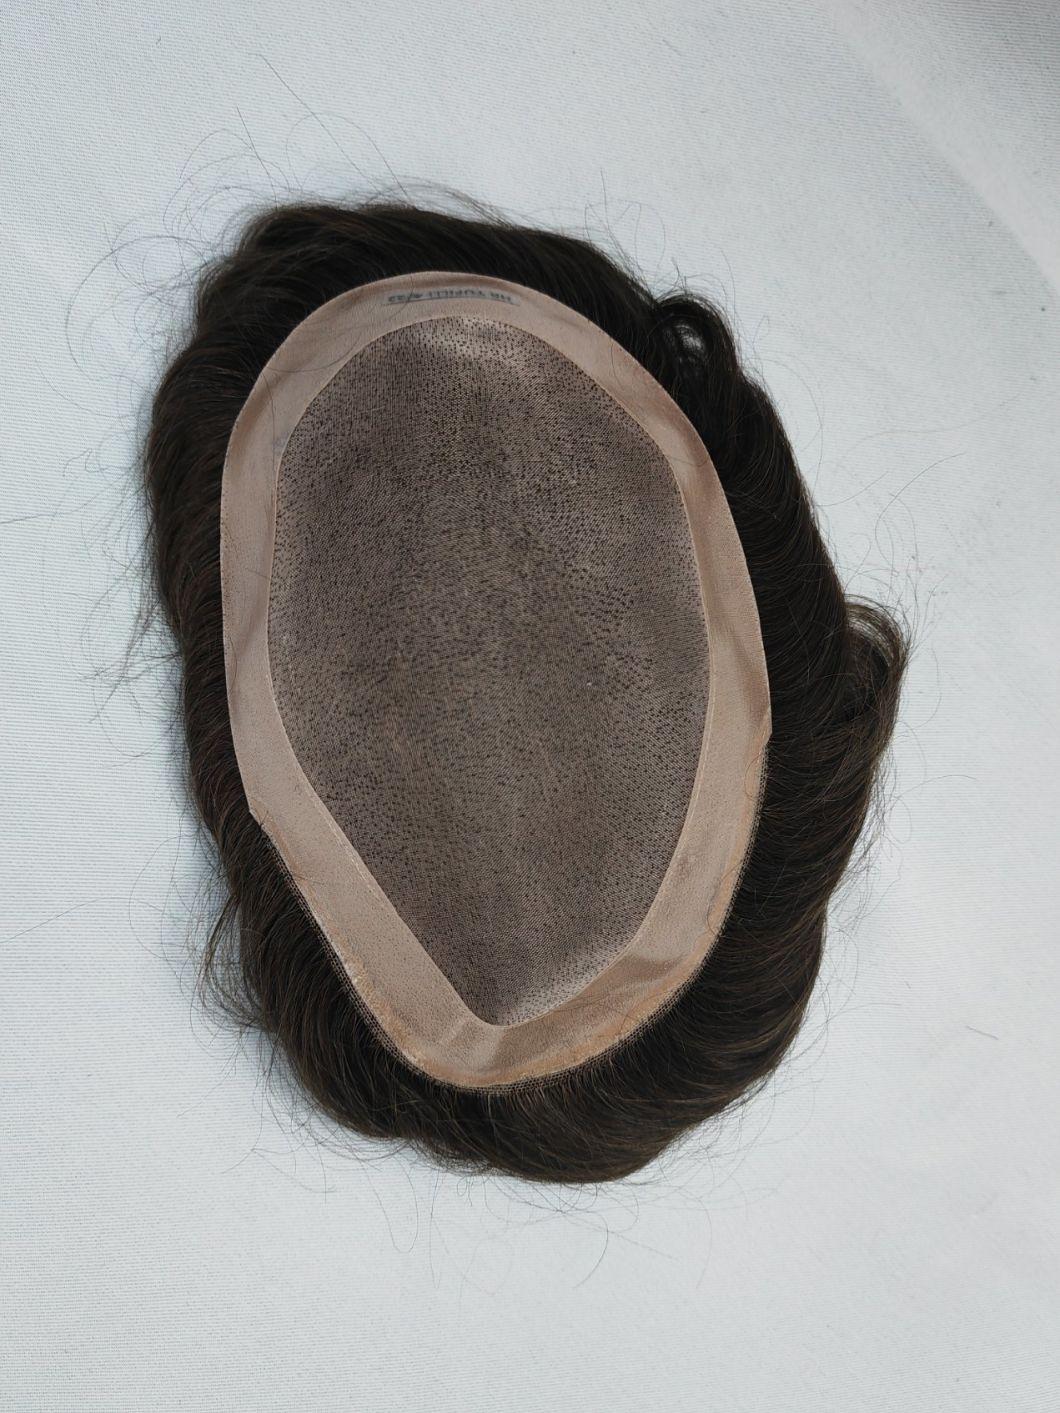 2022 Best Hand Knotted Natural Fine Mono Base Human Hair System Made of Remy Human Hair